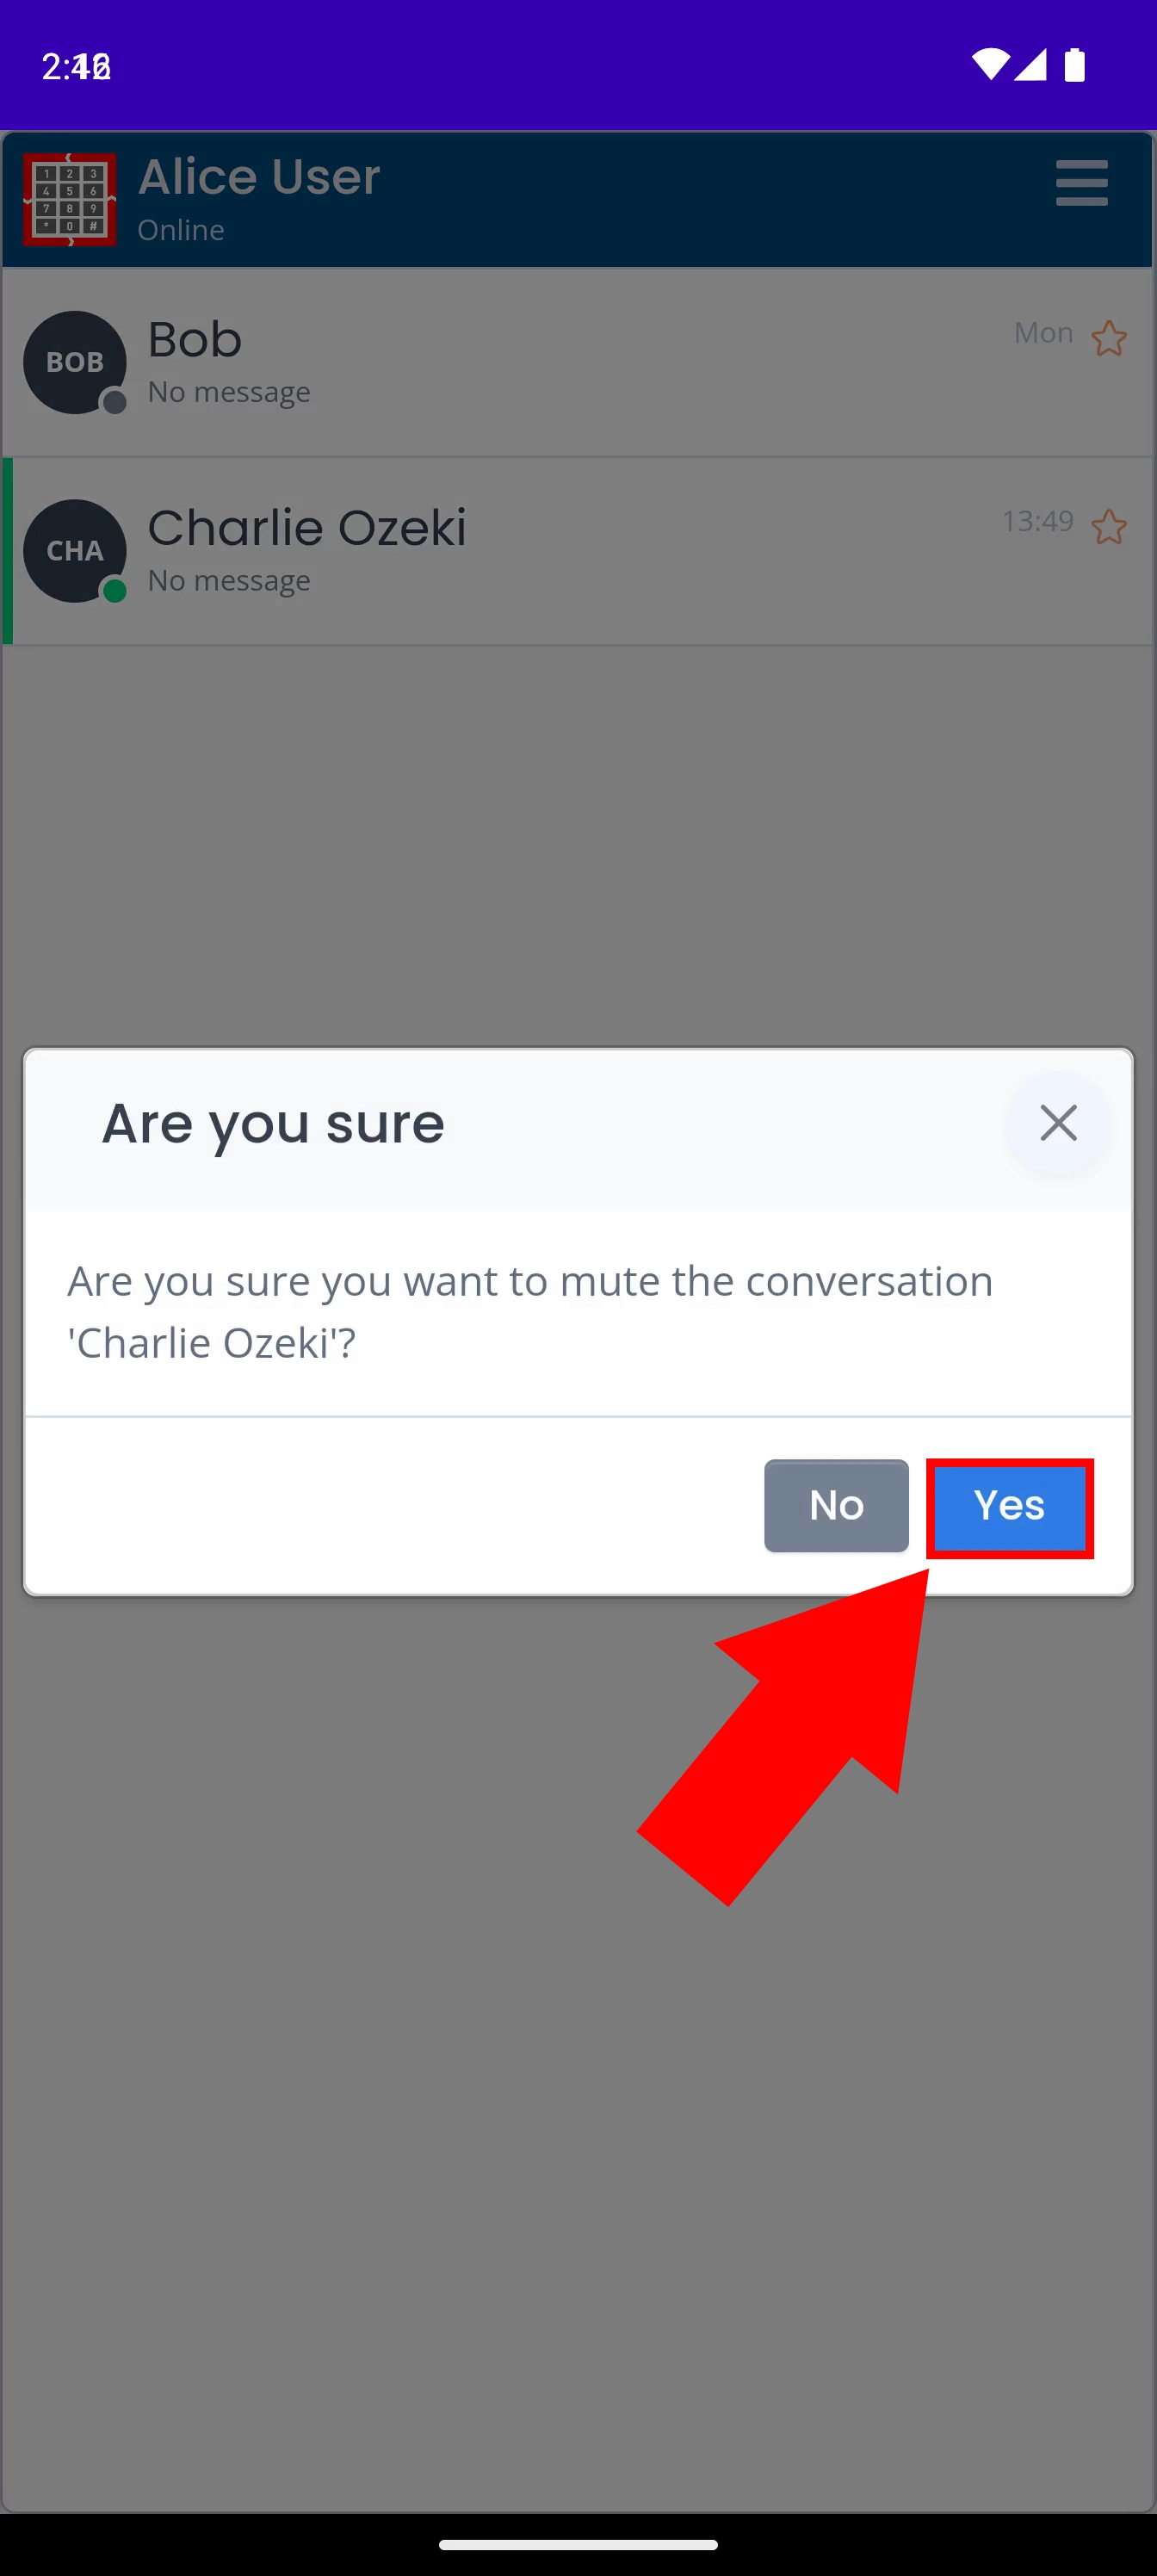 Accept to mute dialog